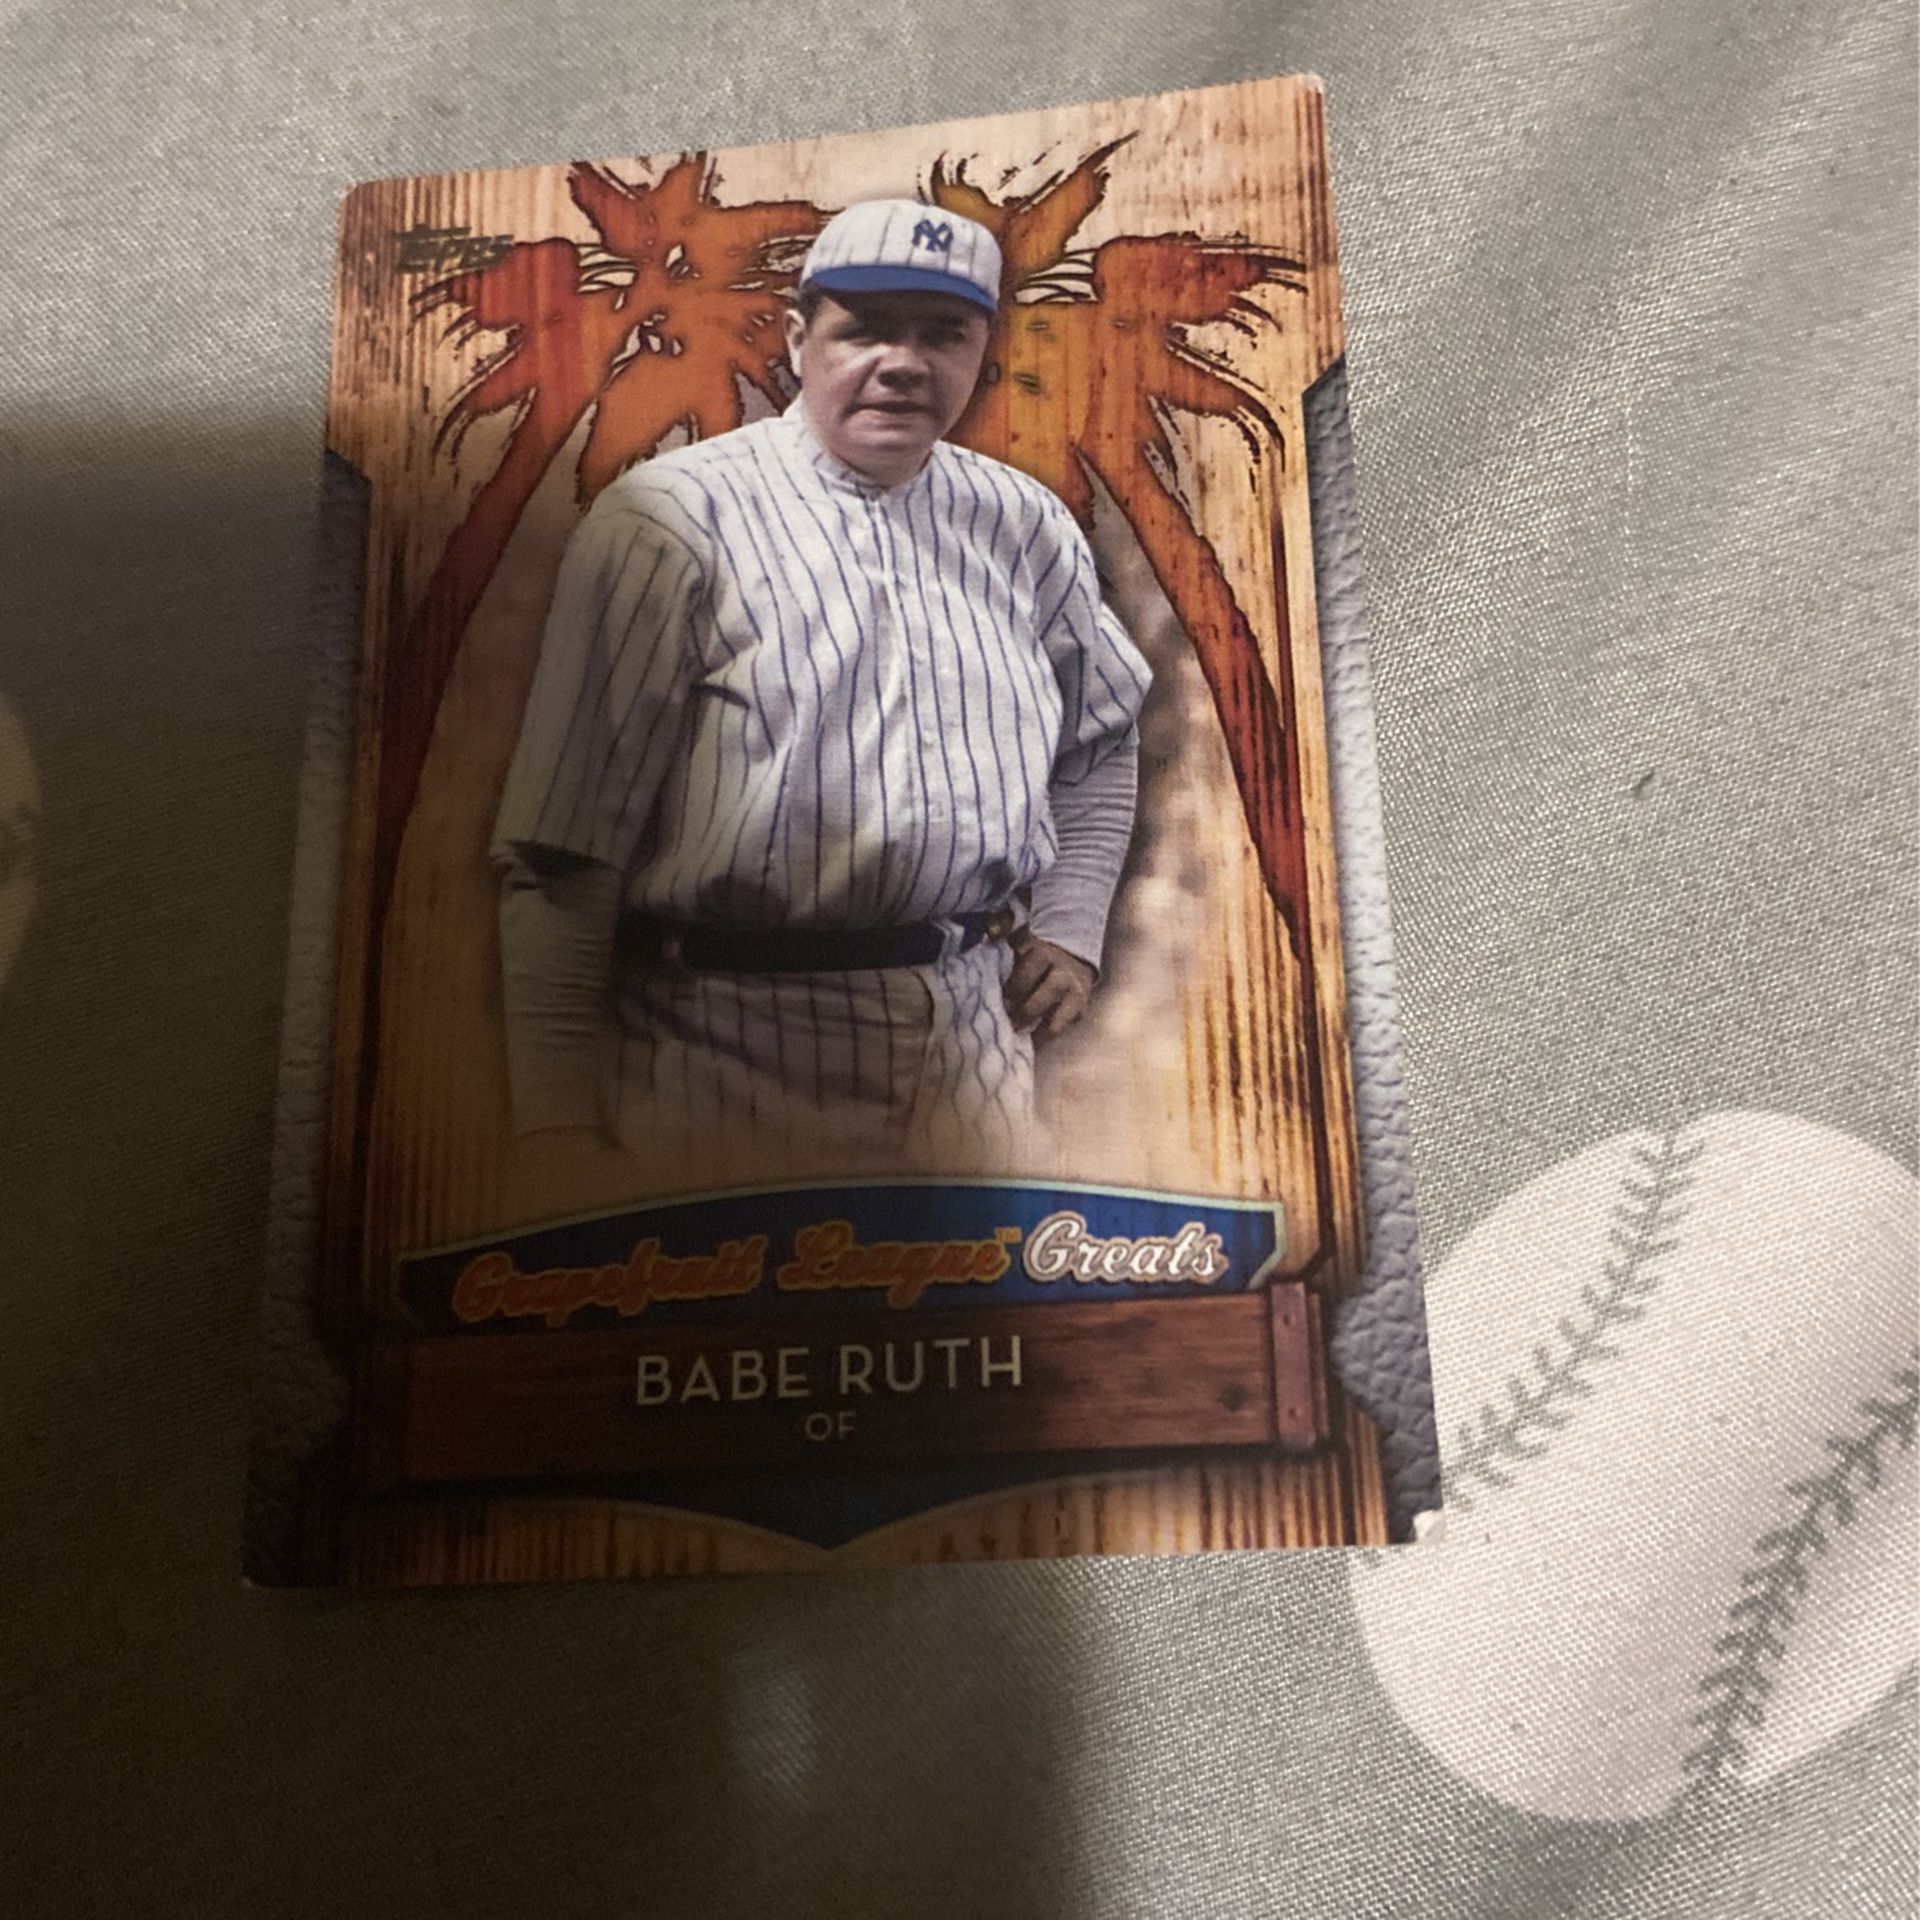 Babe Ruth Baseball Card for Sale in Lawtey, FL - OfferUp